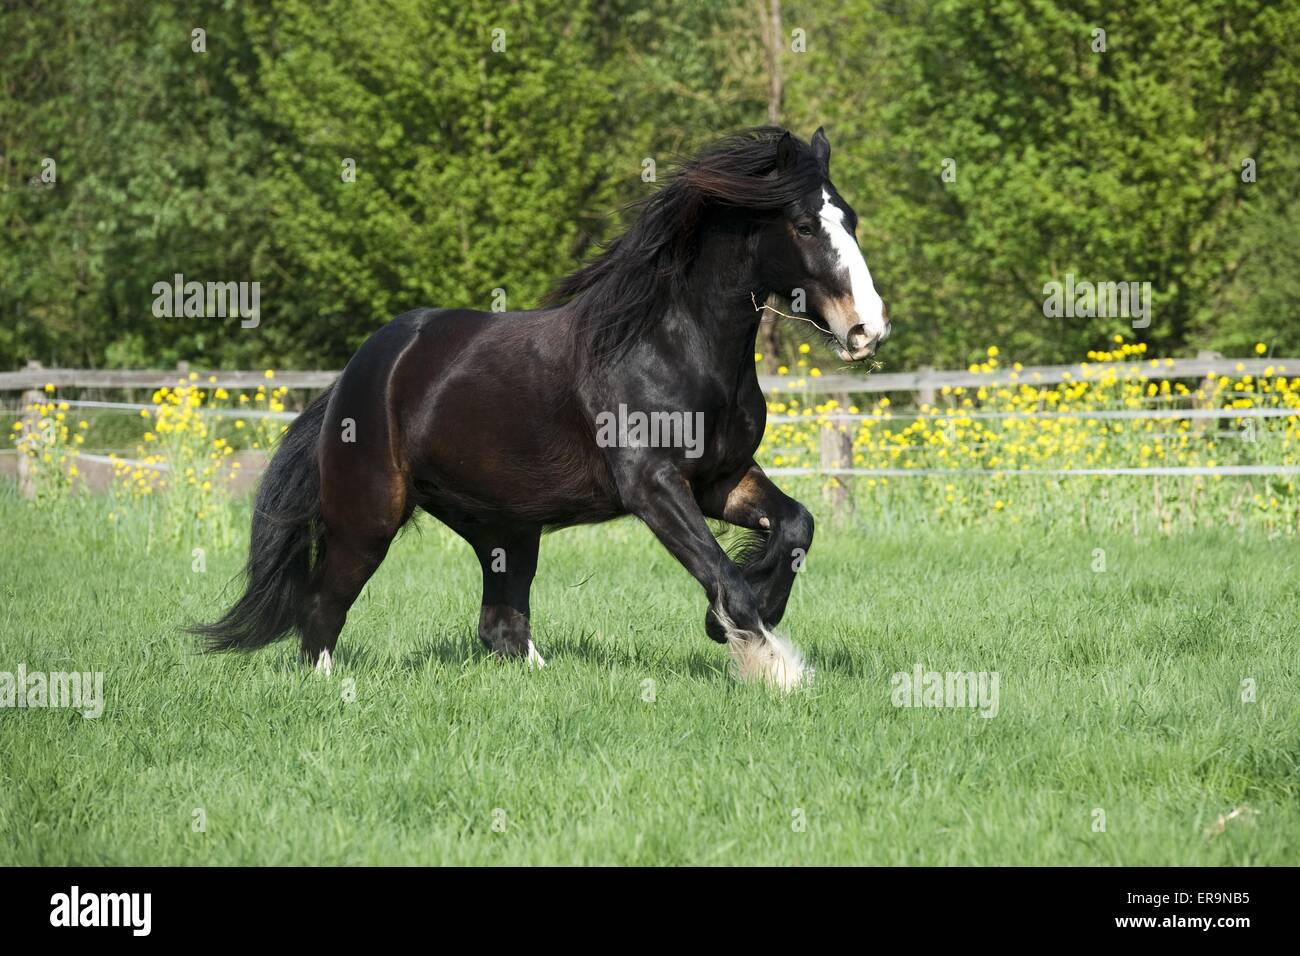 galloping Shire Horse Stock Photo